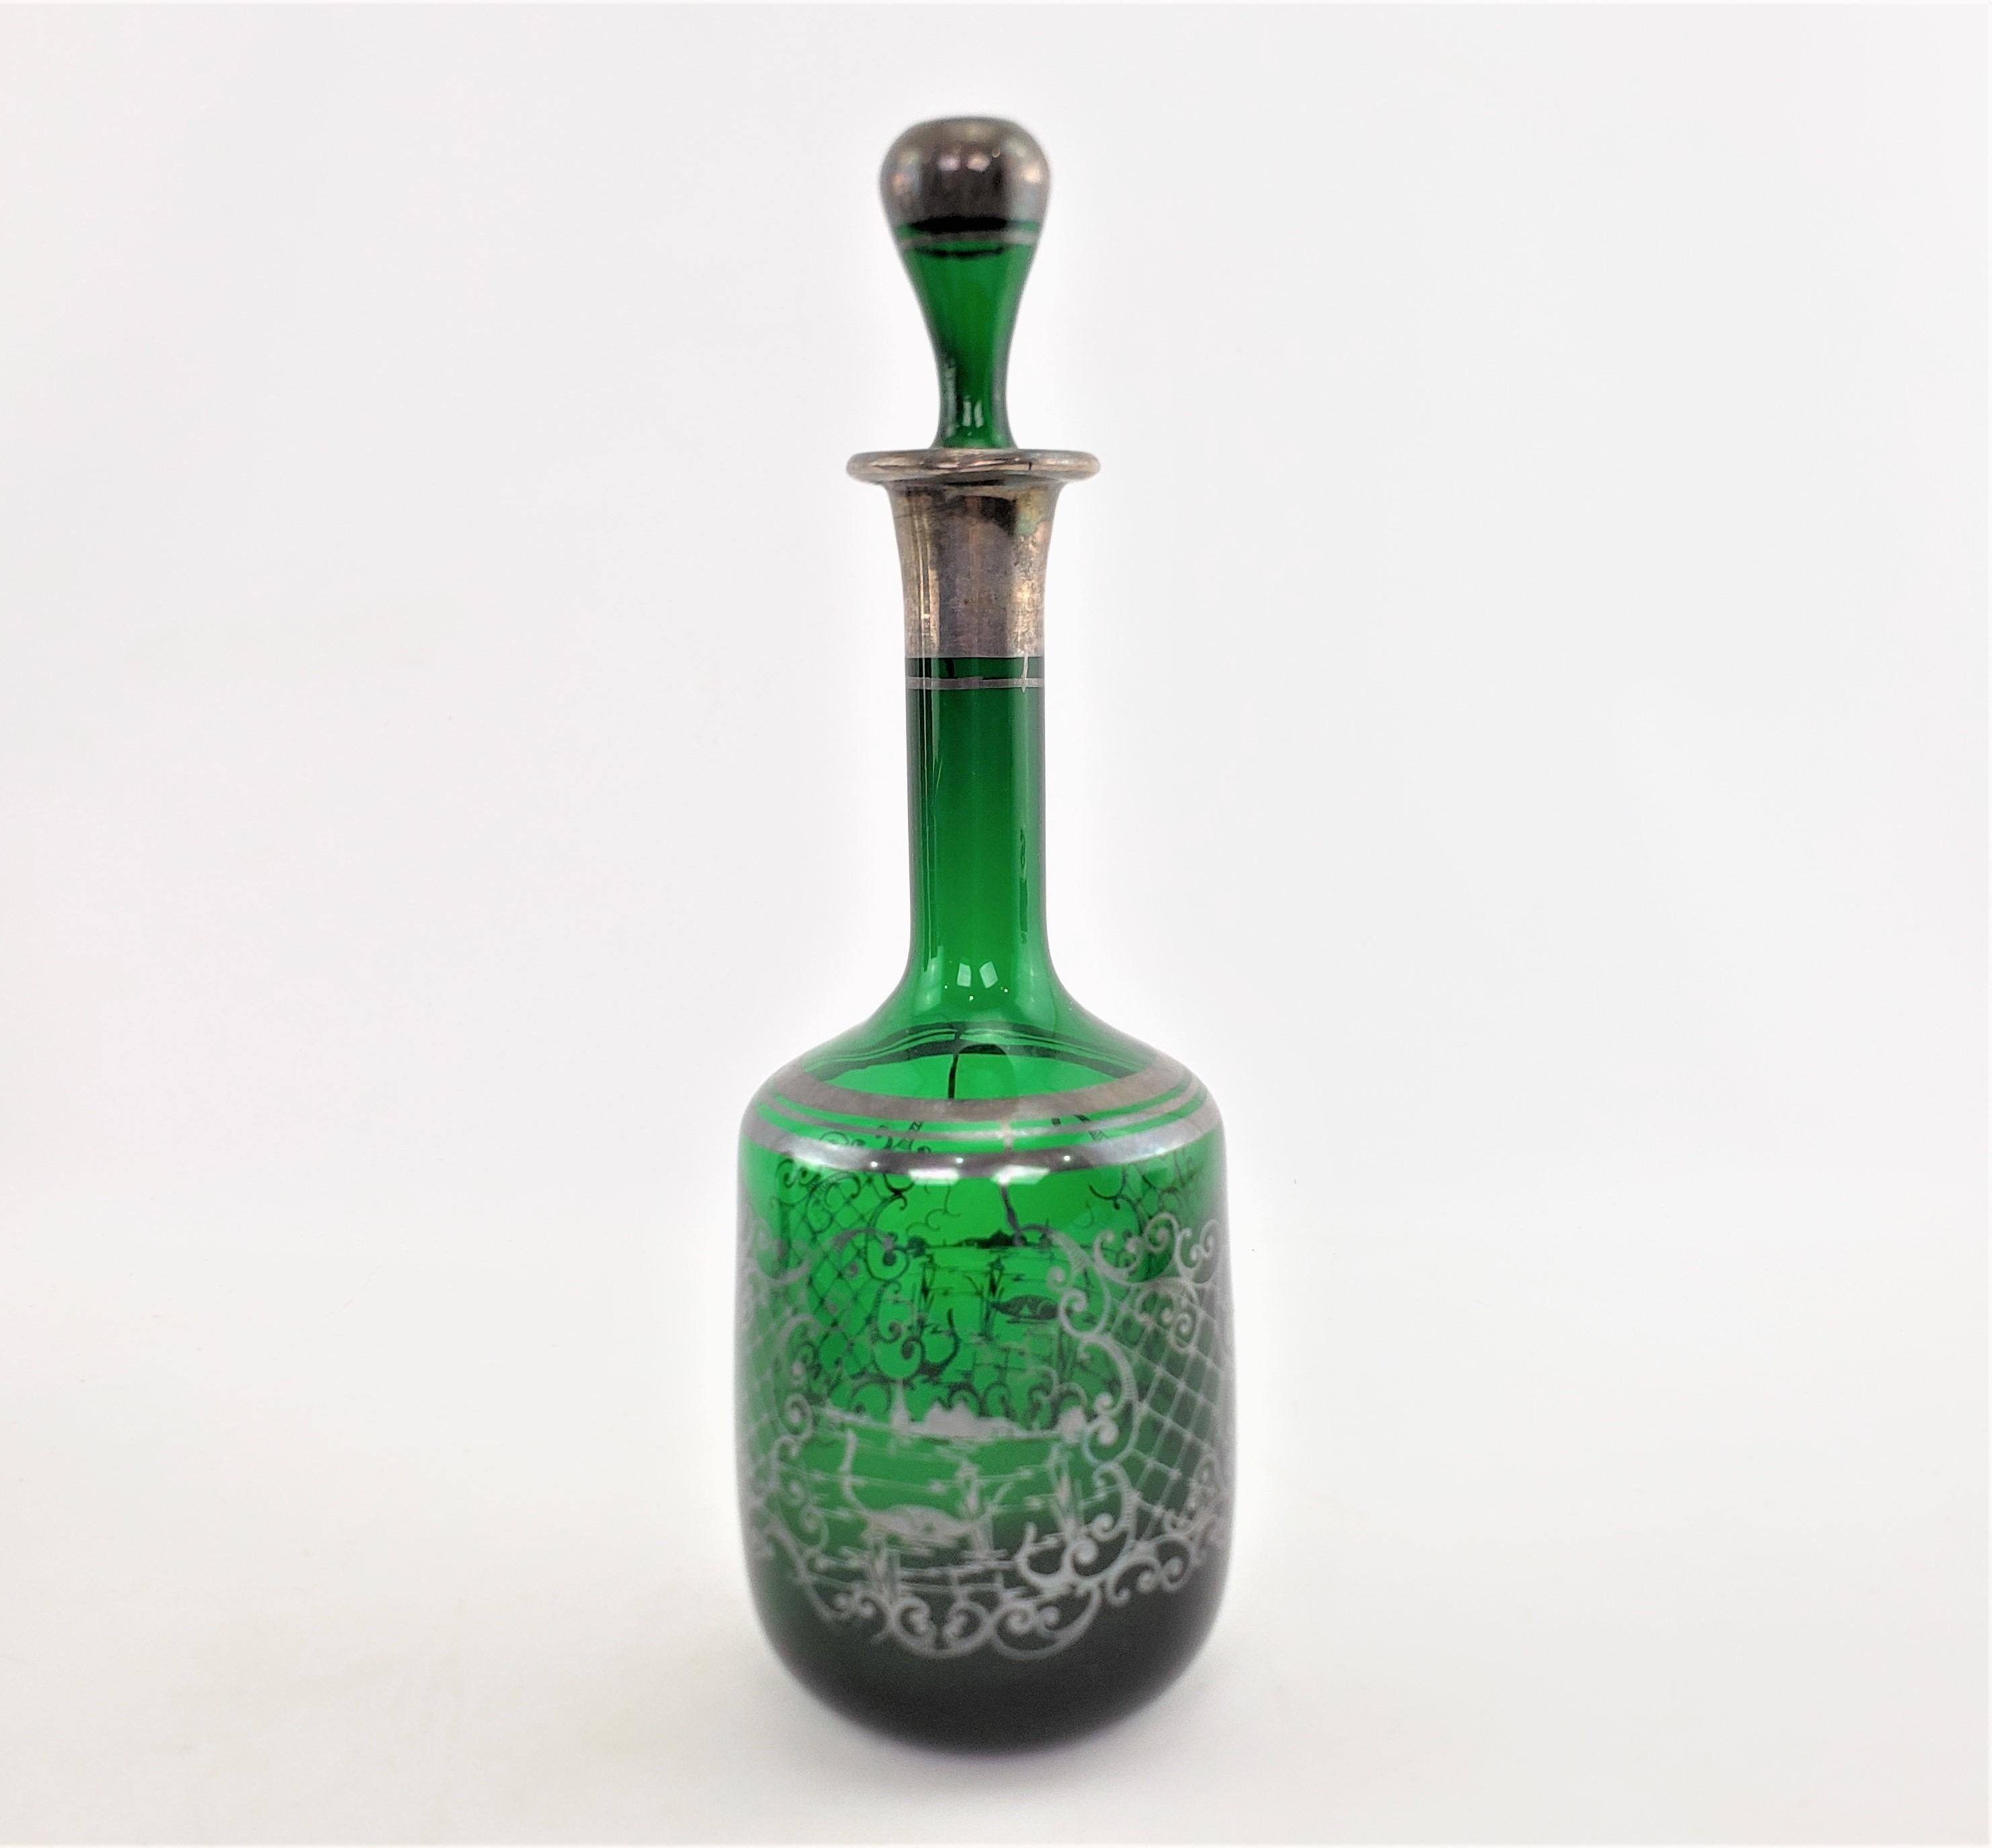 Art Deco Antique Deep Green Bottle Decanter with Silver Overlay Swan & Pond Decoration